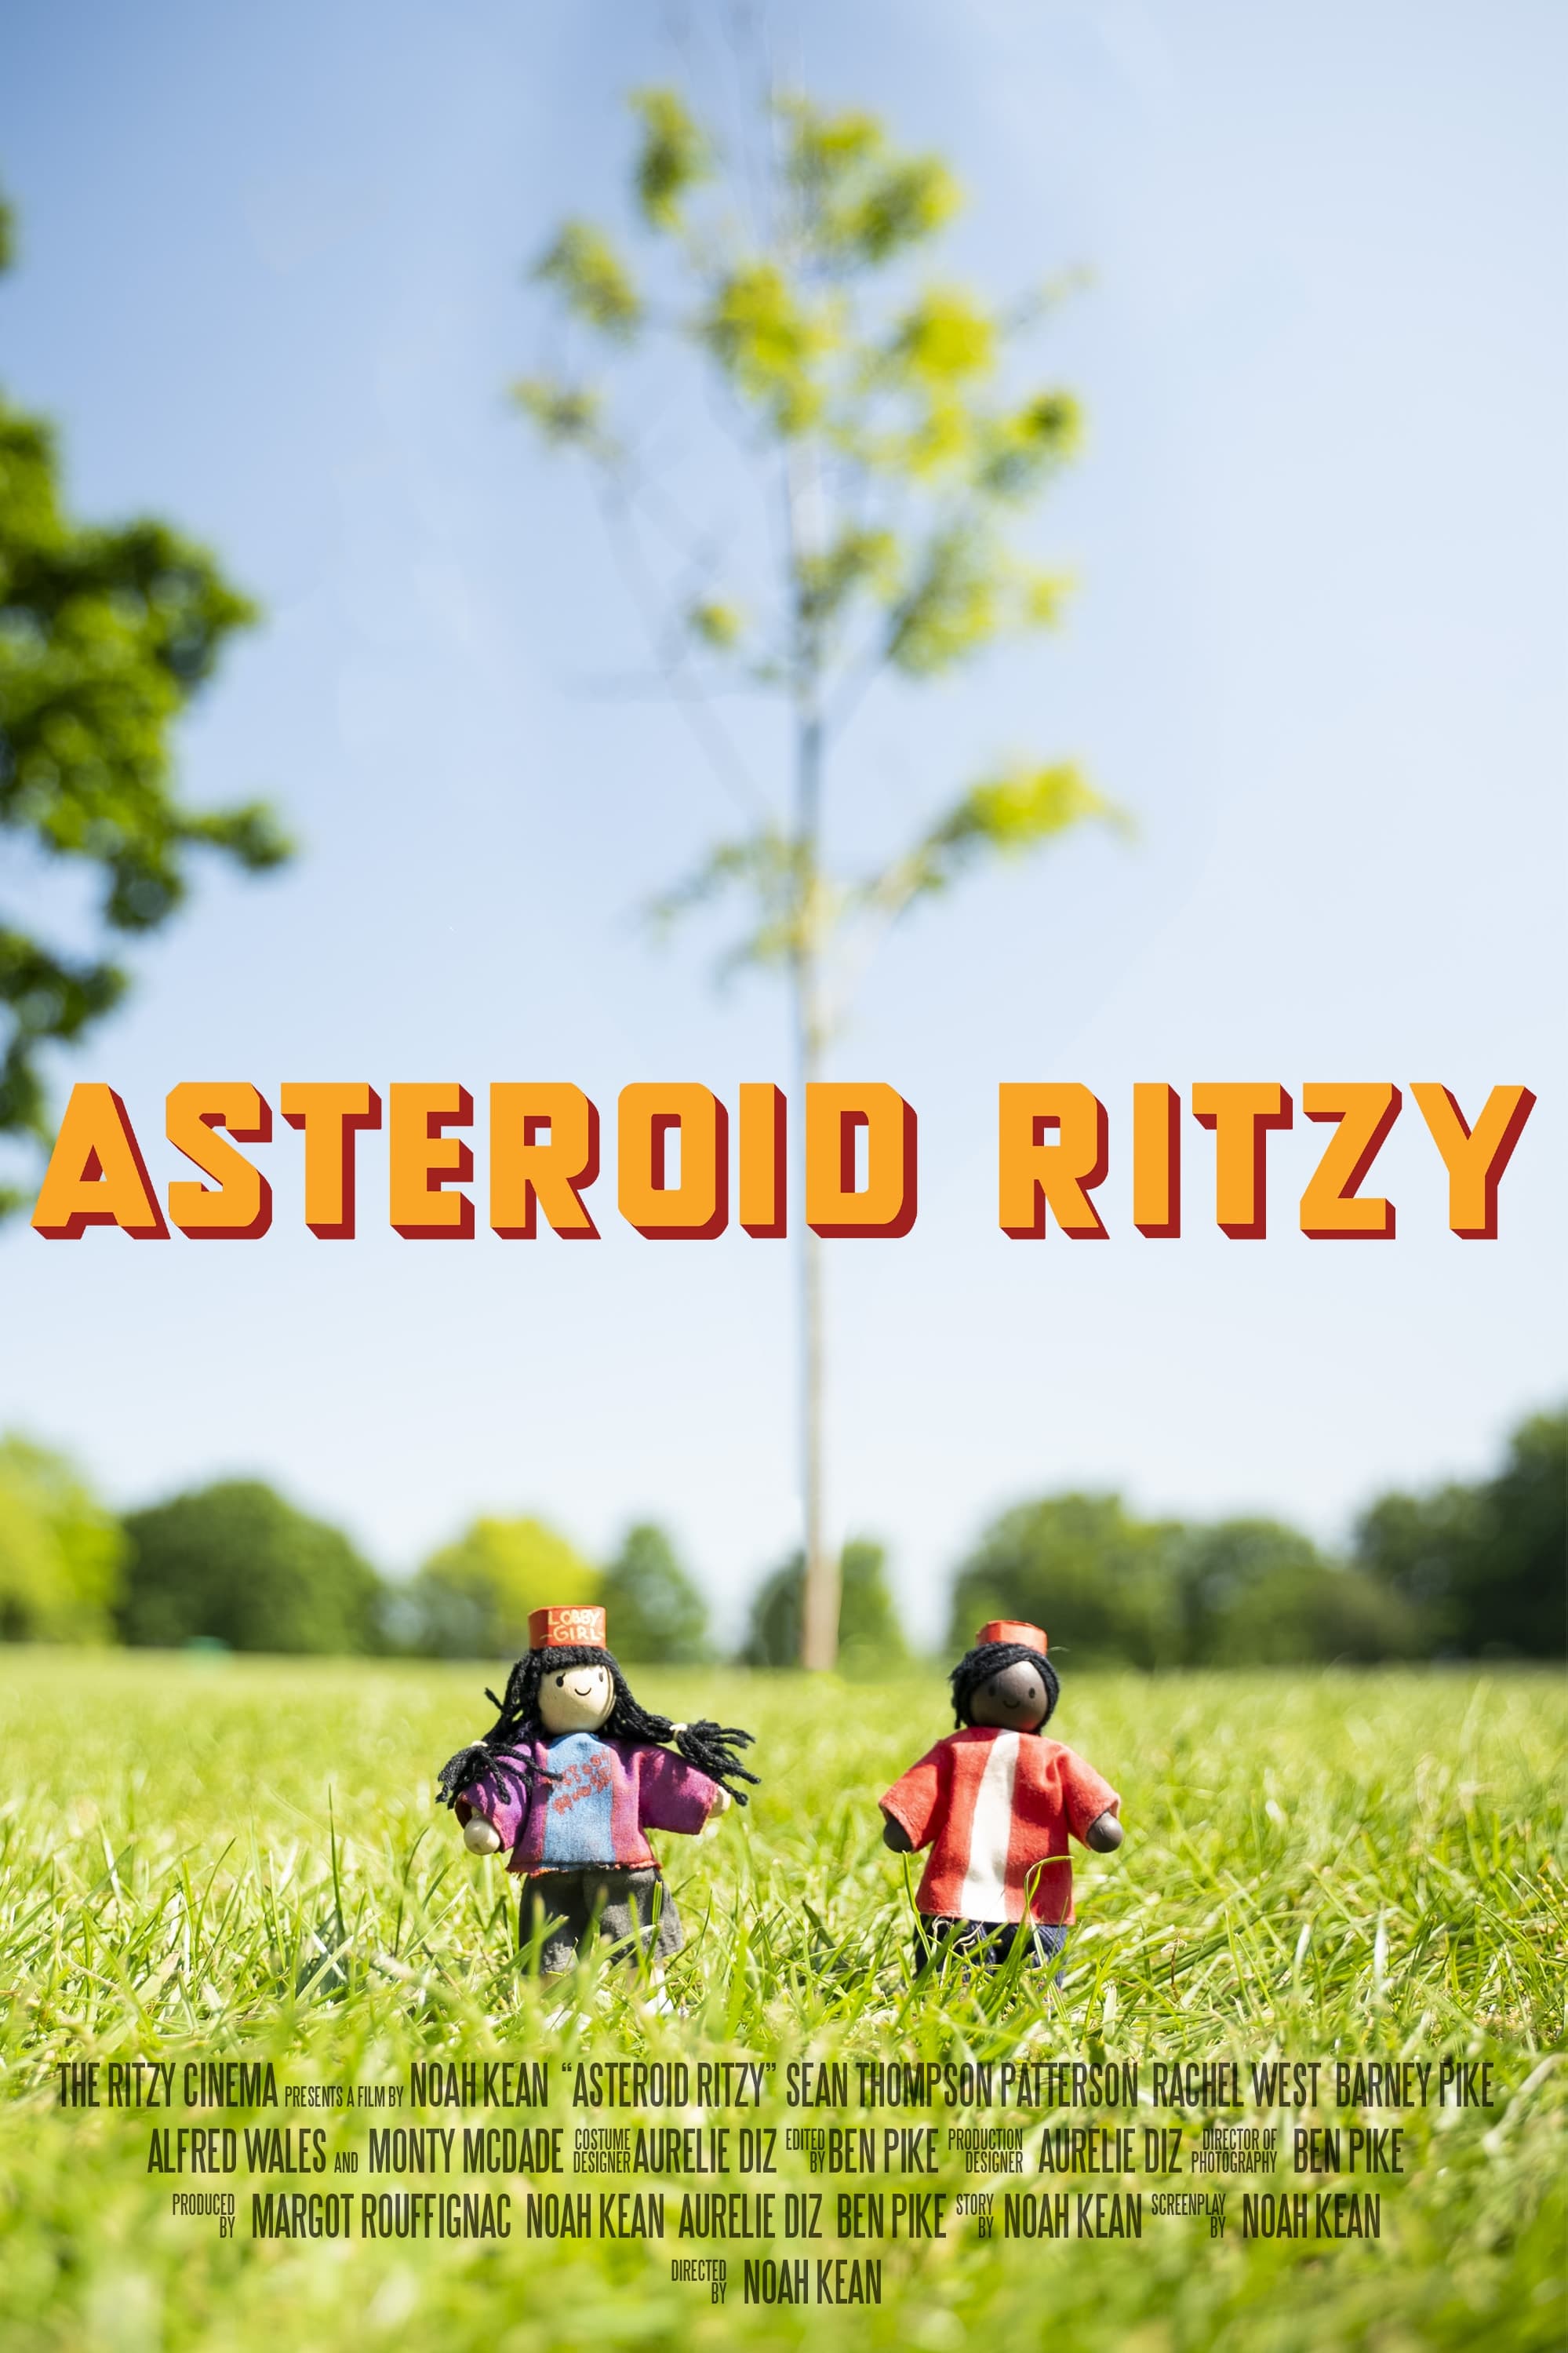 Asteroid Ritzy